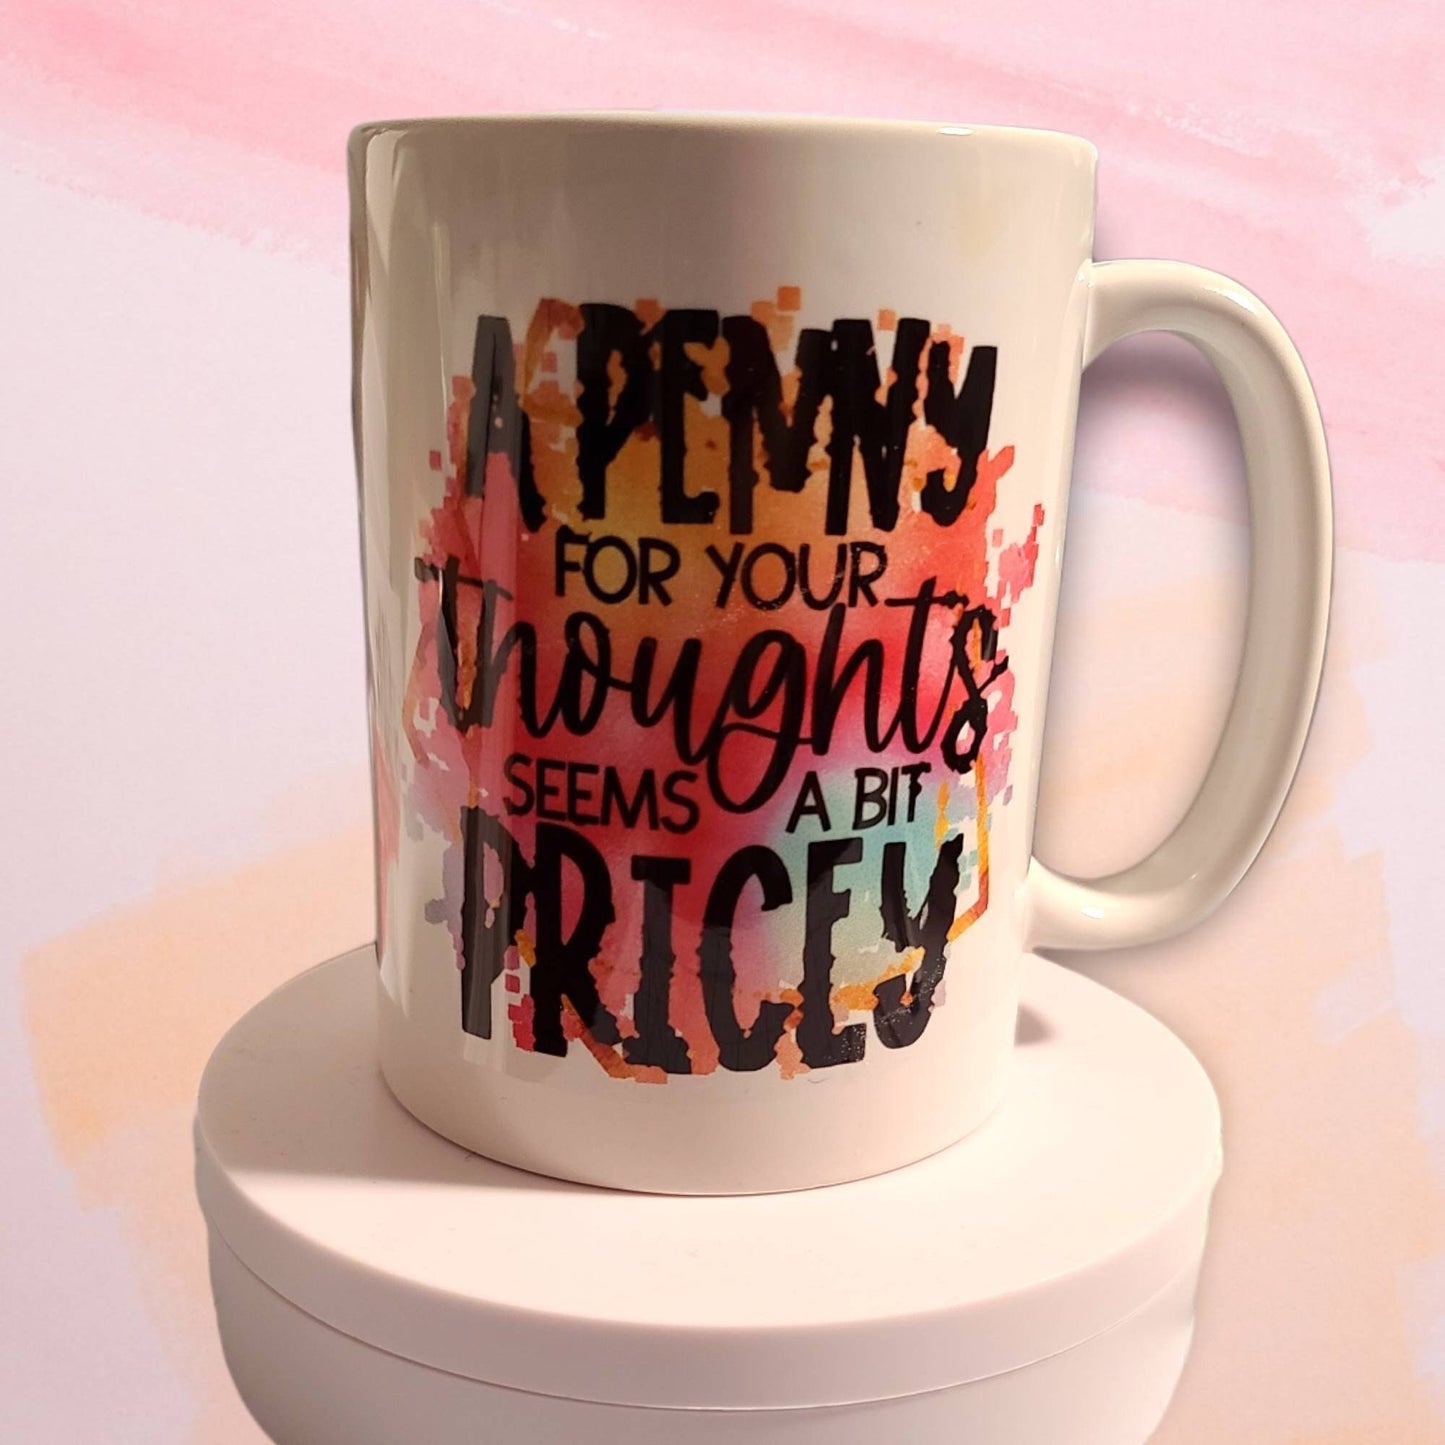 Coffee mug with funny saying. Coffee cup with personalization option. Cup with quote "A penny is priced too much." Funny drinkware gift.